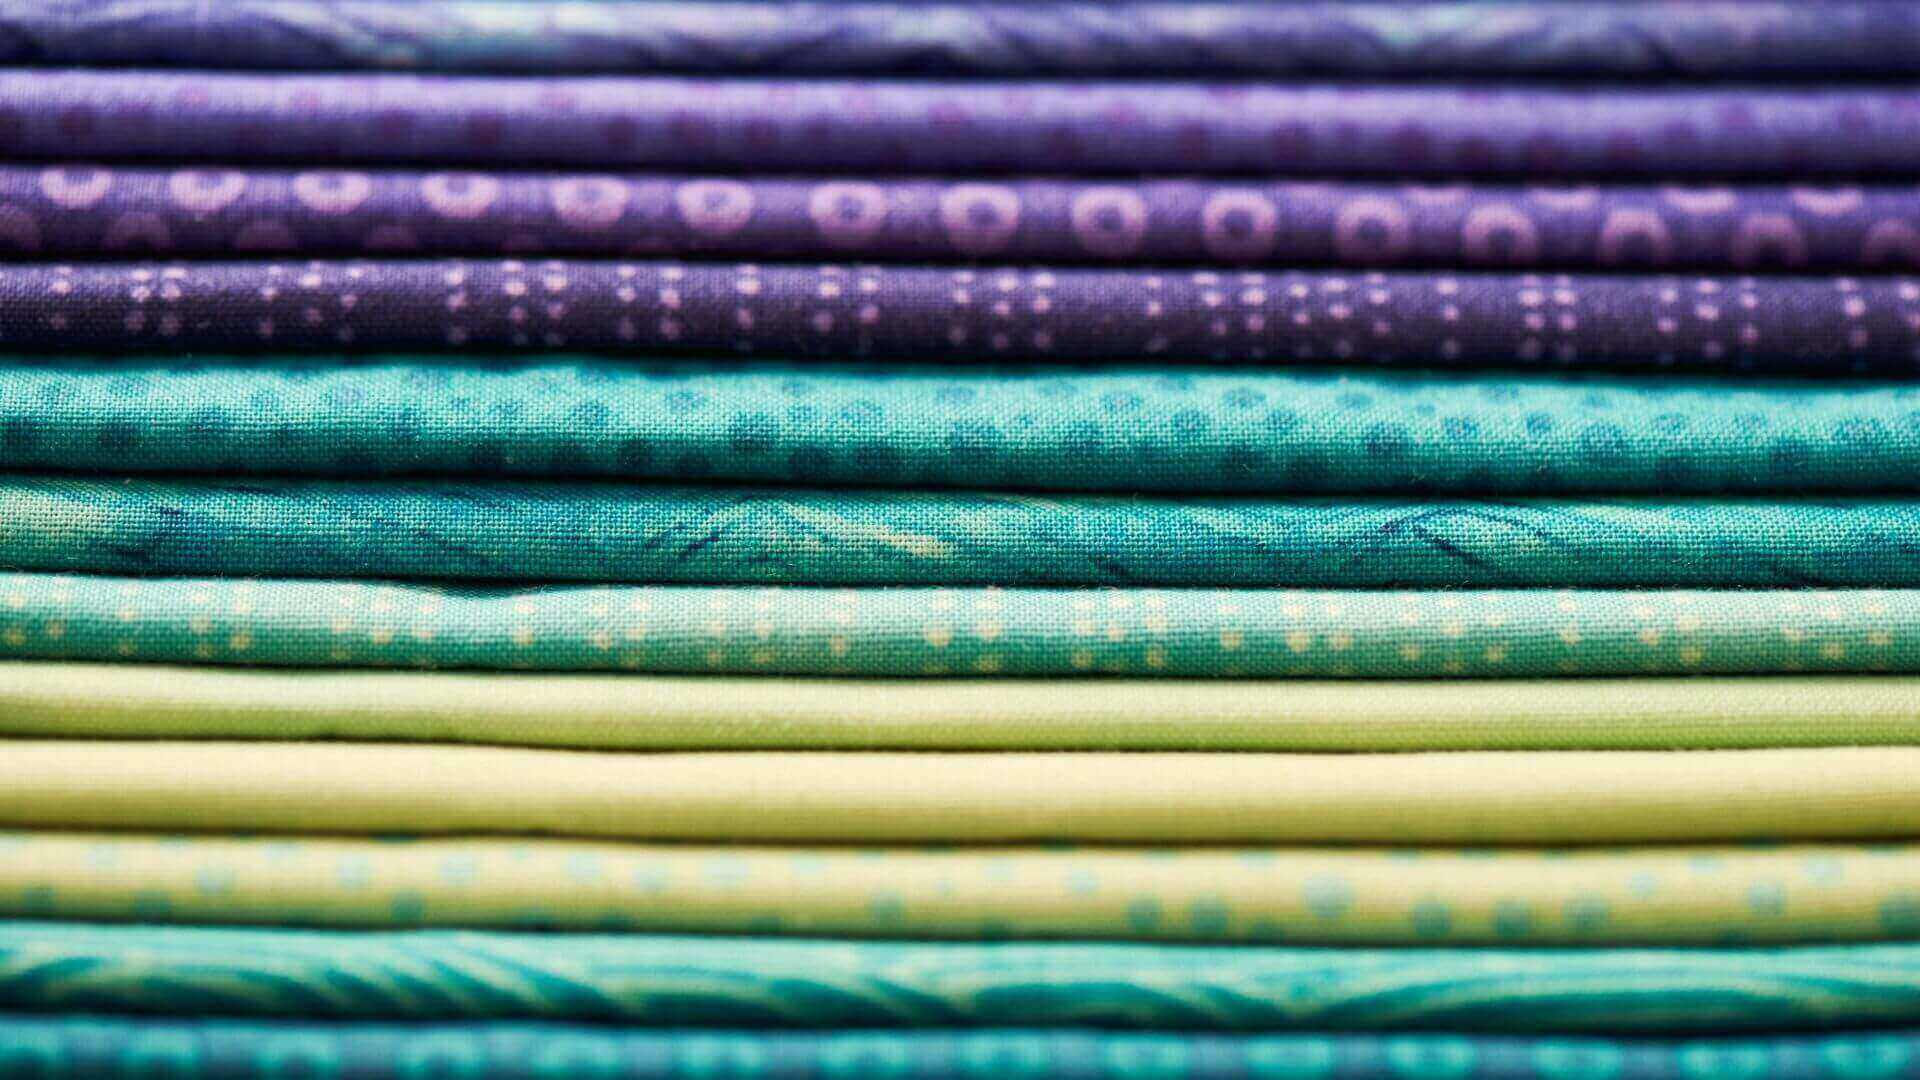 Collombatti Naturals Beeswax Wraps FAQ picture of a stack of colourful quilting fabrics